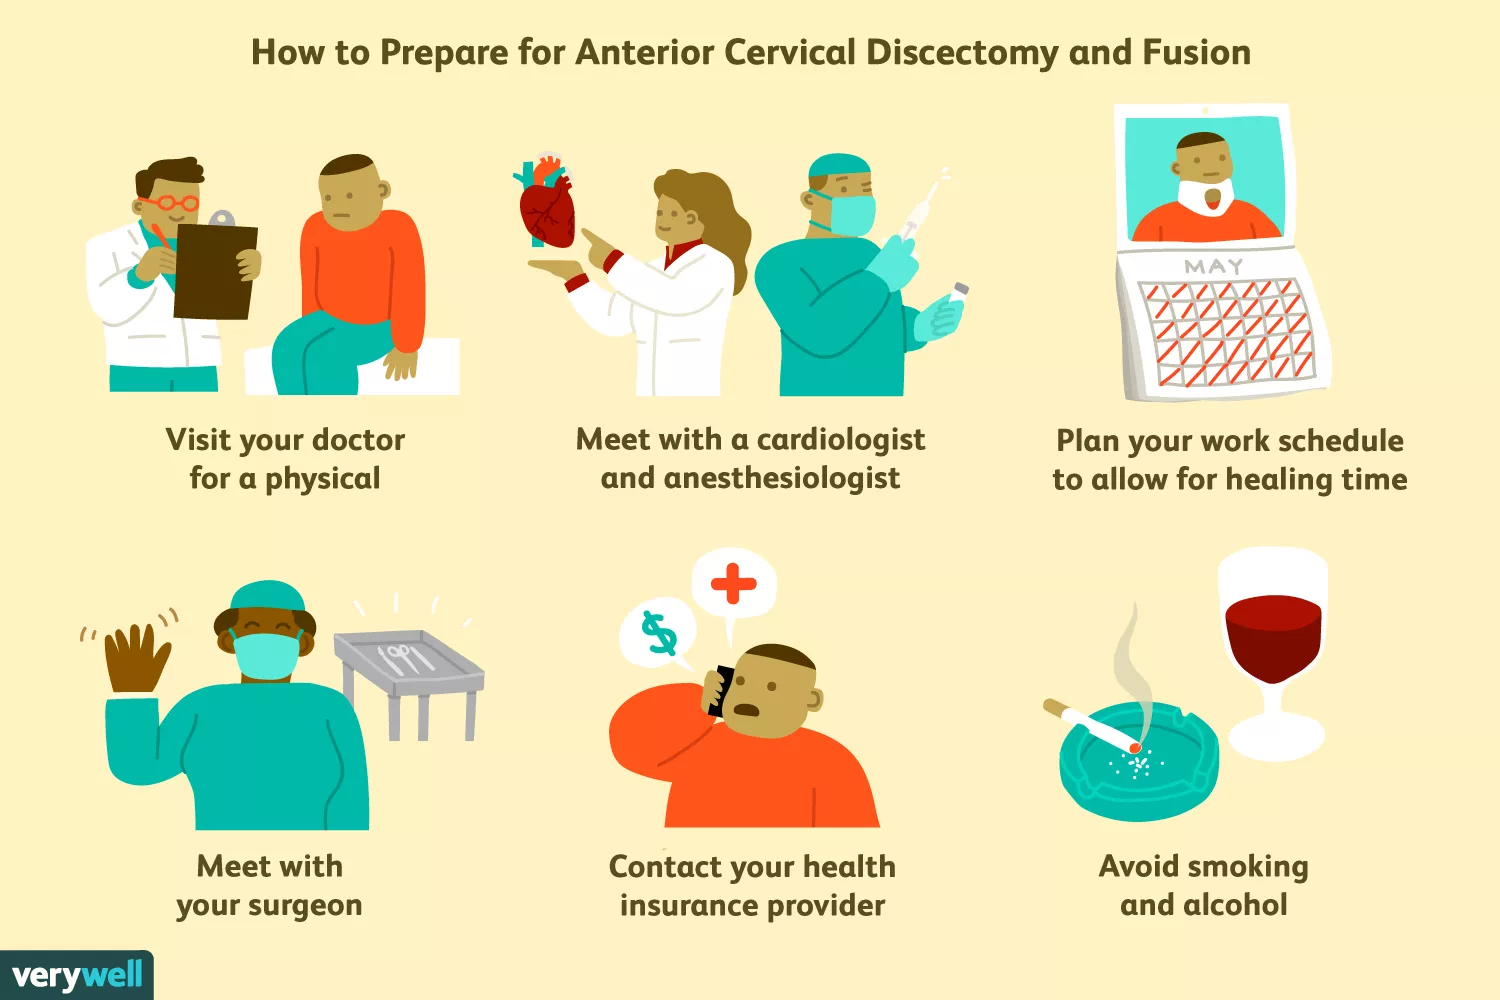 Anterior Cervical Discectomy and Fusion: Everything You Need to Know